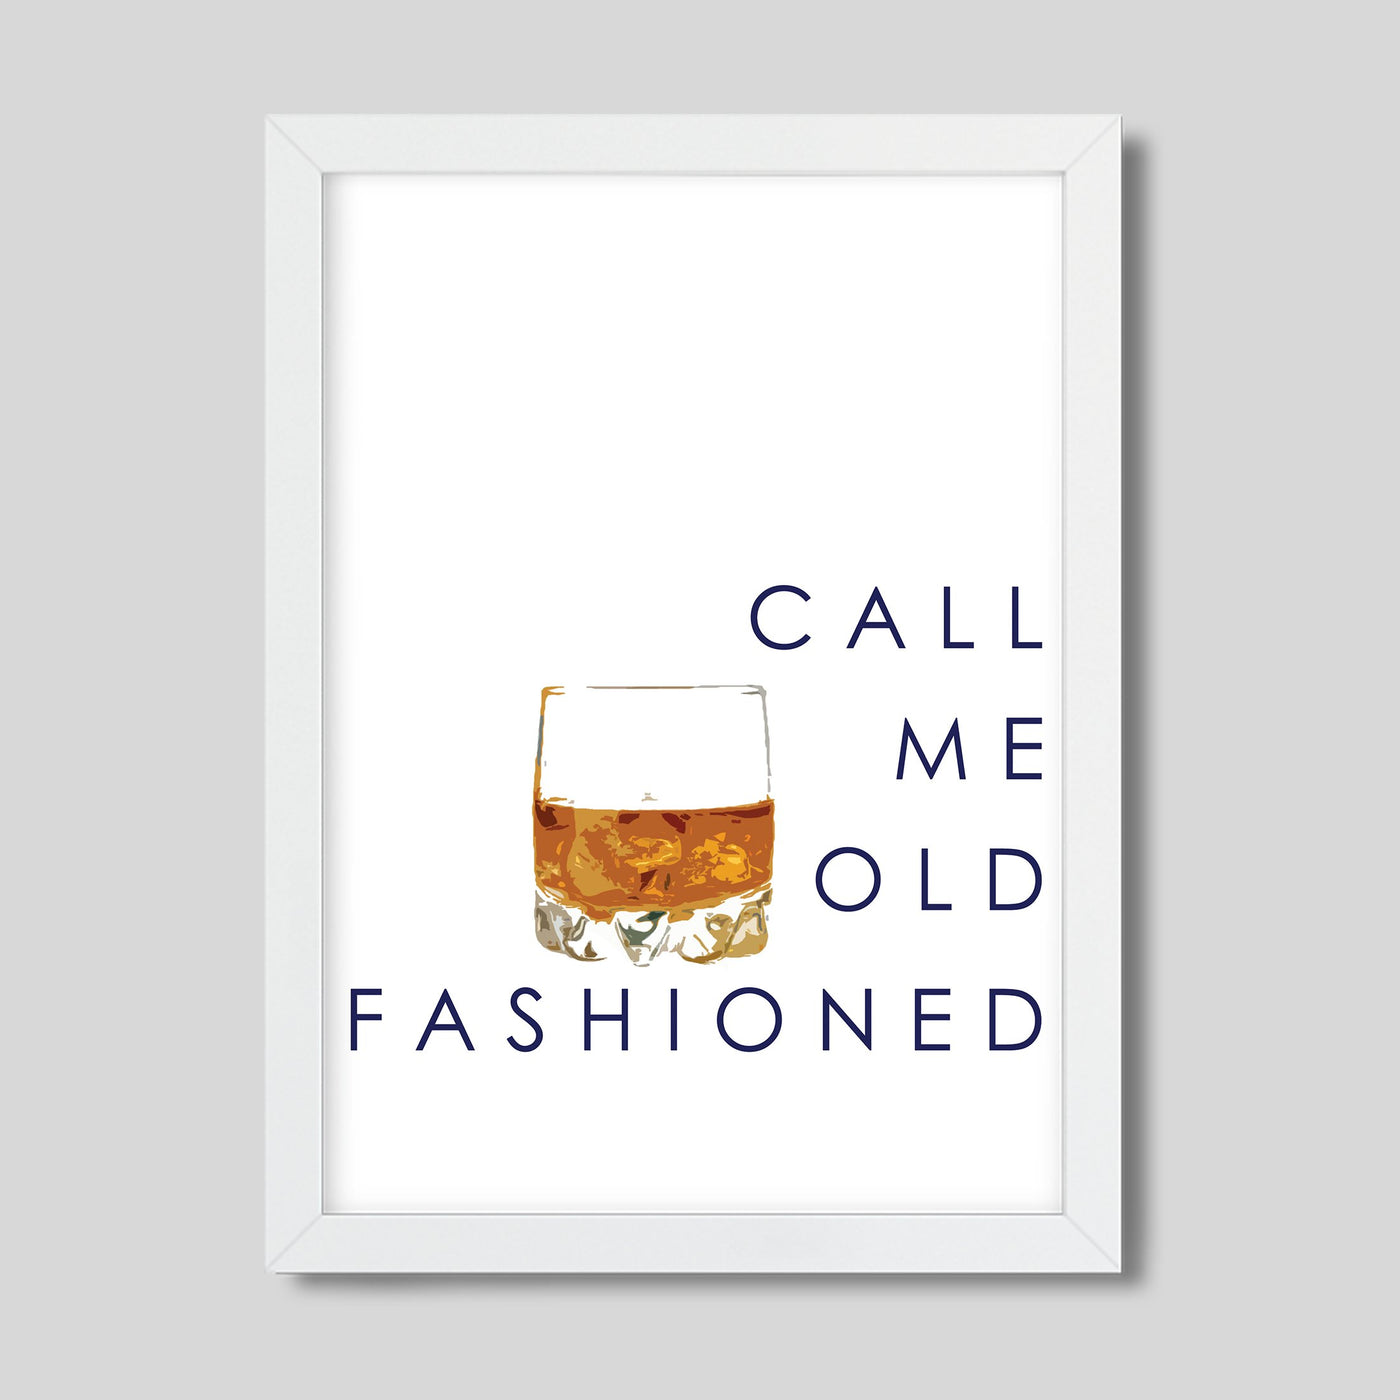 Gallery Prints 8x10 / white frame Call Me Old Fashioned Print dombezalergii